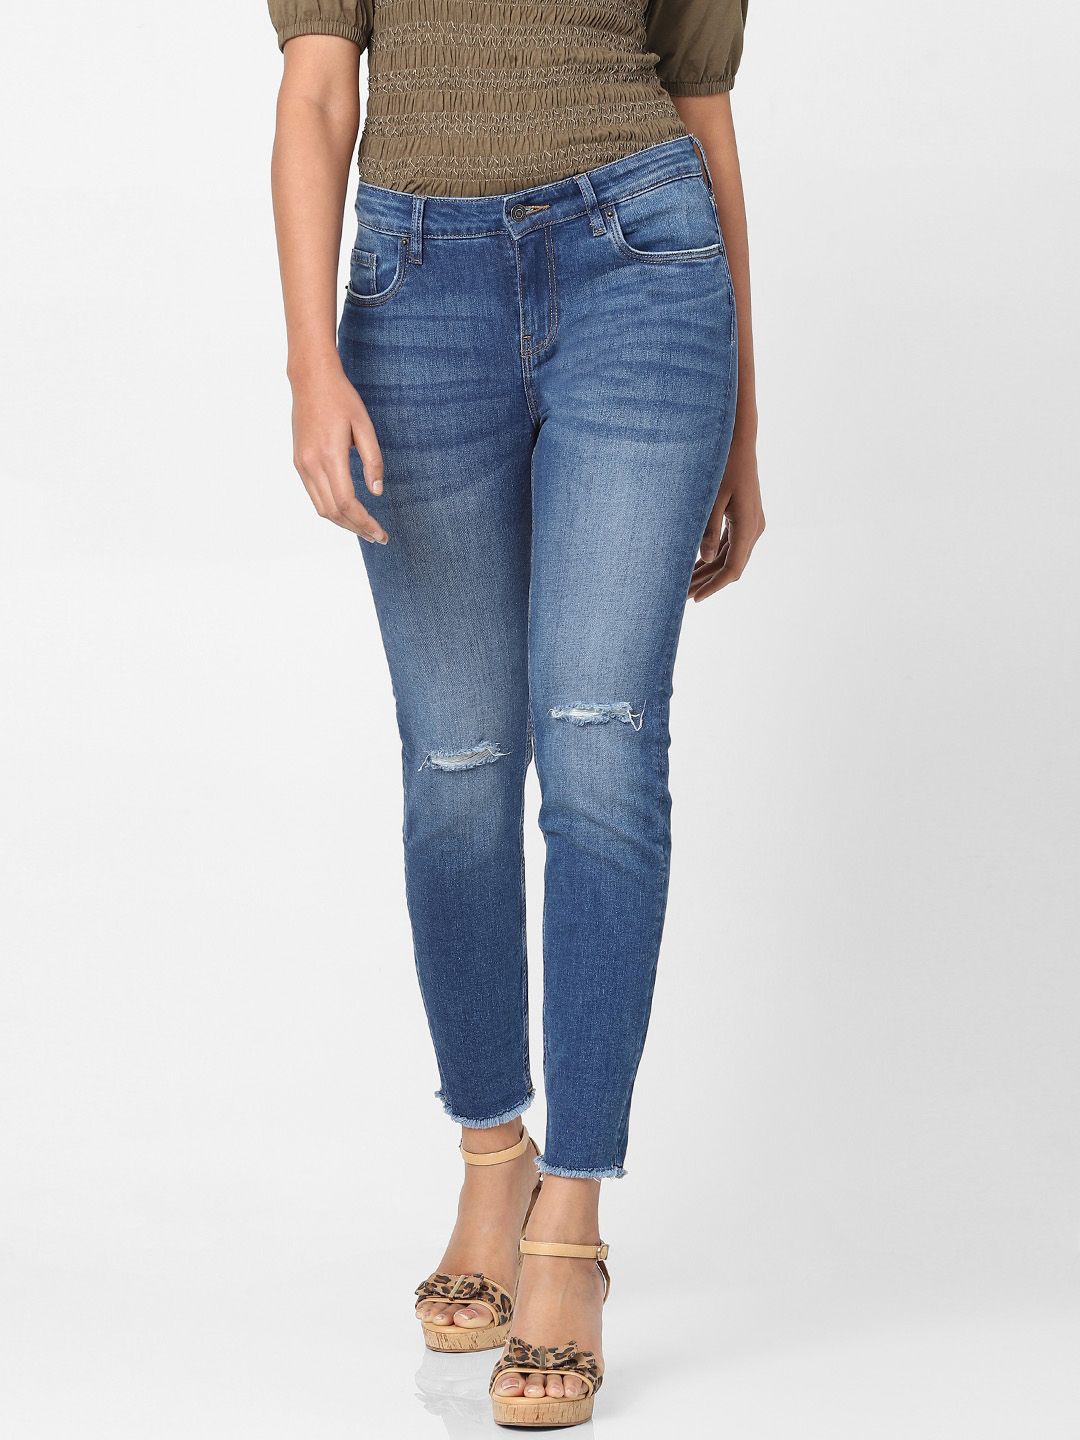 Vero Moda Women Blue Straight Fit High-Rise Low Distress Light Fade Stretchable Jeans Price in India